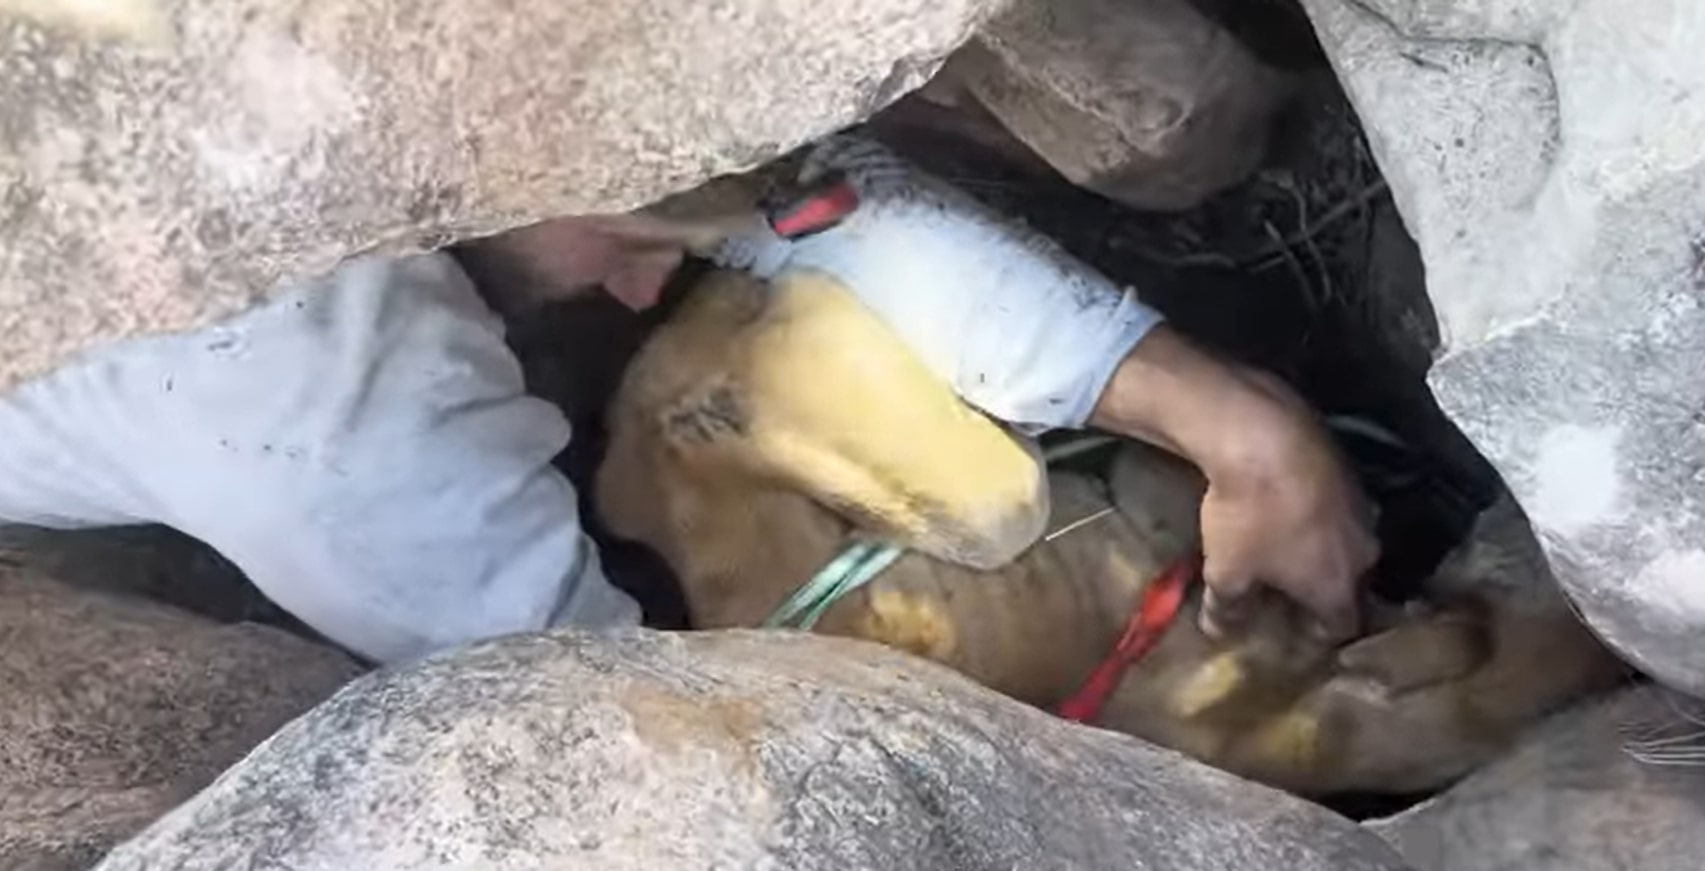 rescuer helping the dog